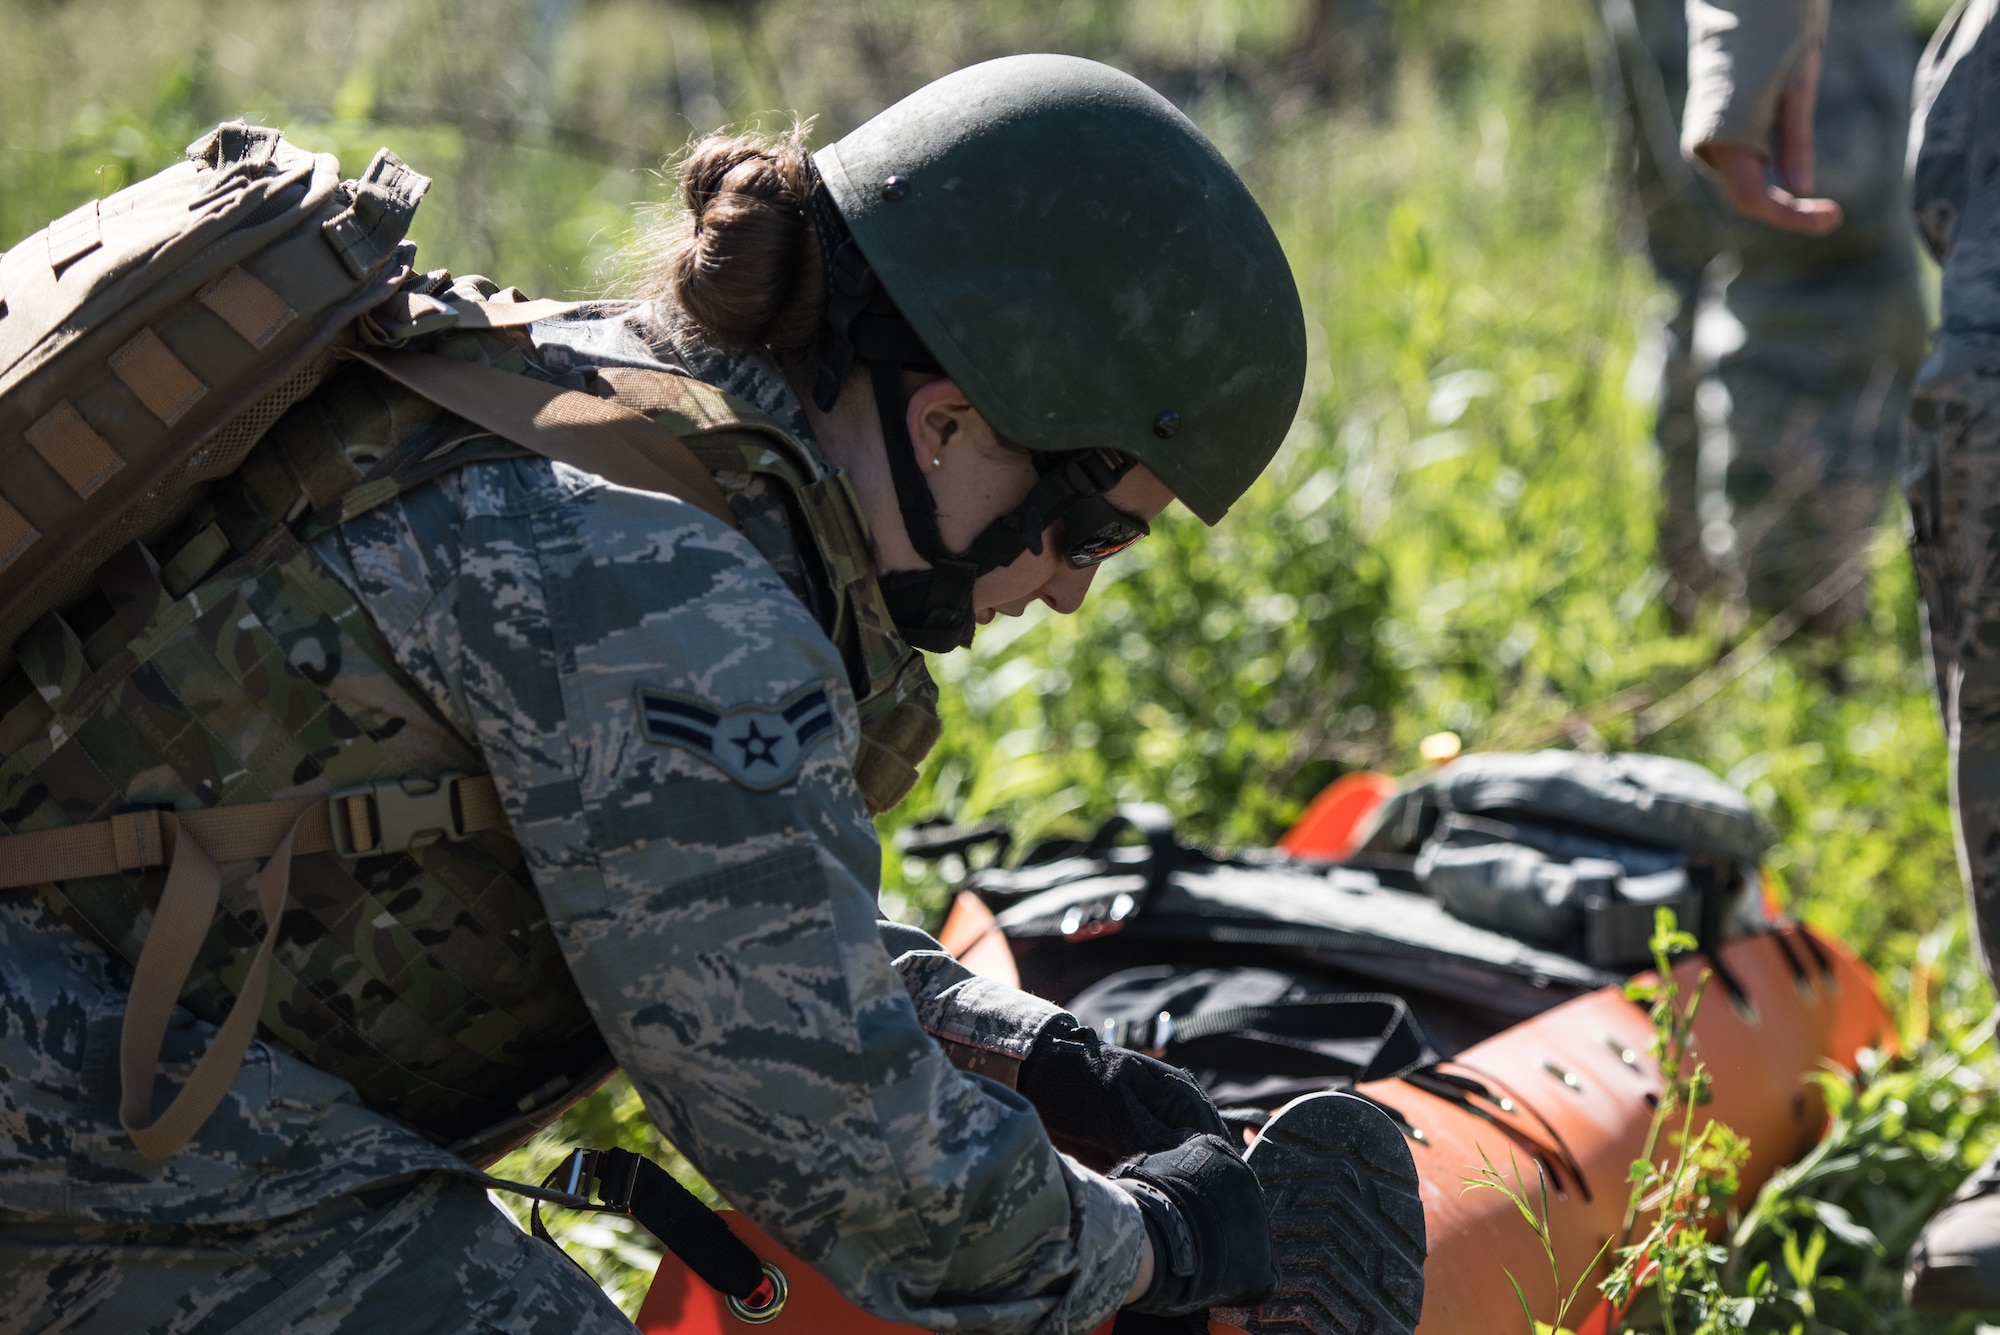 U.S. Air Force Airman 1st Class Kayla Rhodes, a medic with the 193rd Special Operations Medical Group Detachment 1, Pennsylvania Air National Guard, secures a casualty on a litter during Tactical Combat Casualty Care training.